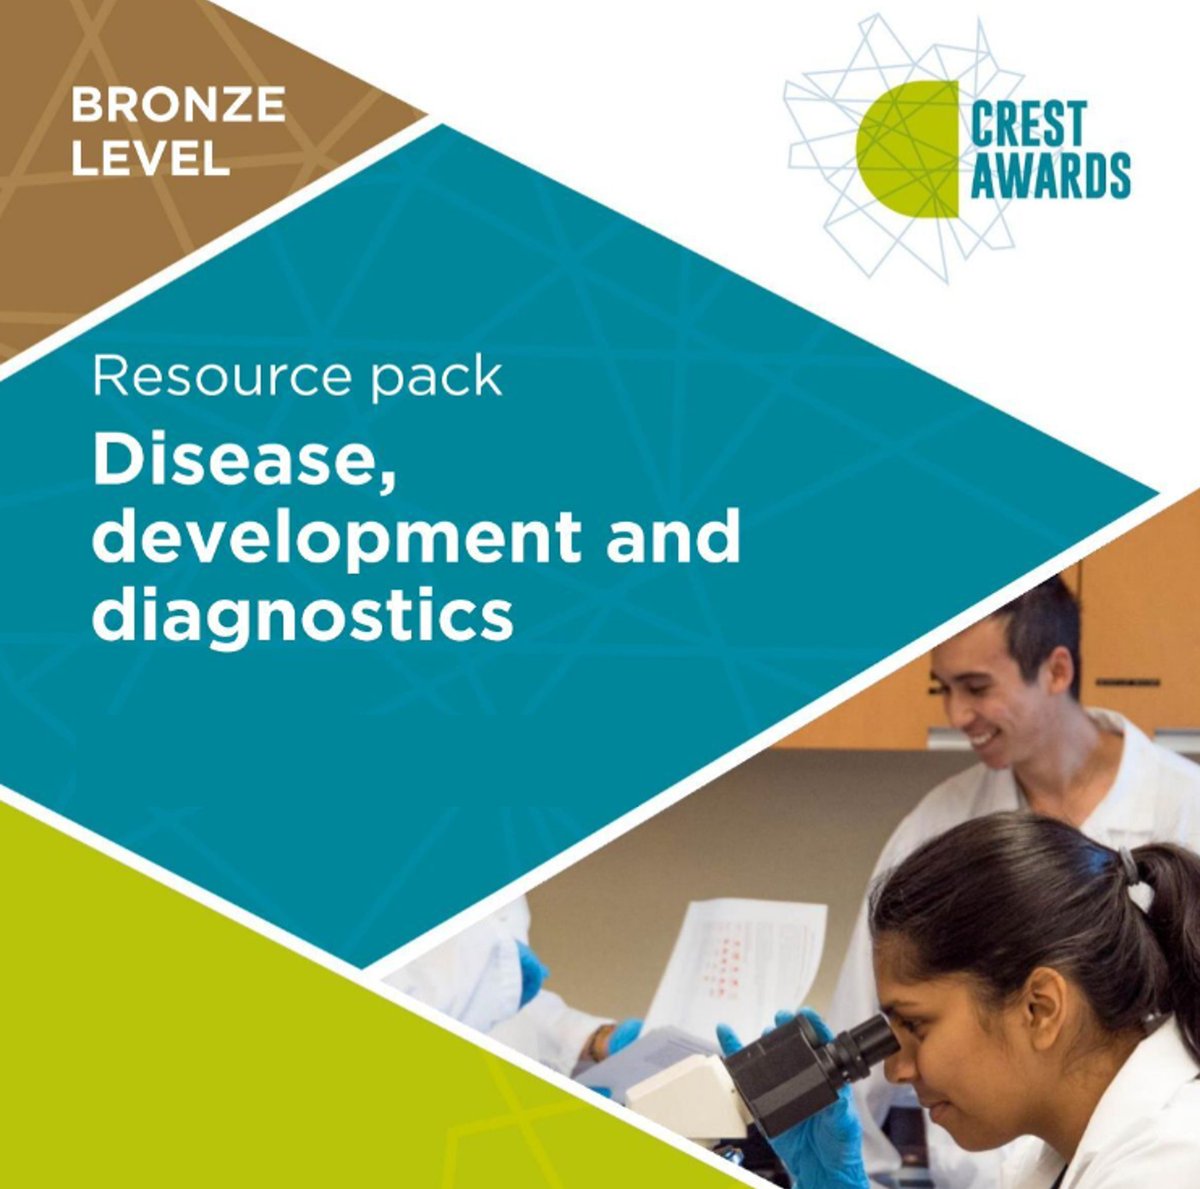 It's #InternationalActionDayForWomensHealth tomorrow❤️‍🩹 To tie in with the day, why not get your students involved in the disease, development and diagnostics #CRESTAward projects? Find out more here: secondarylibrary.crestawards.org/disease-develo… #Education #STEM #WomensHealth #Health